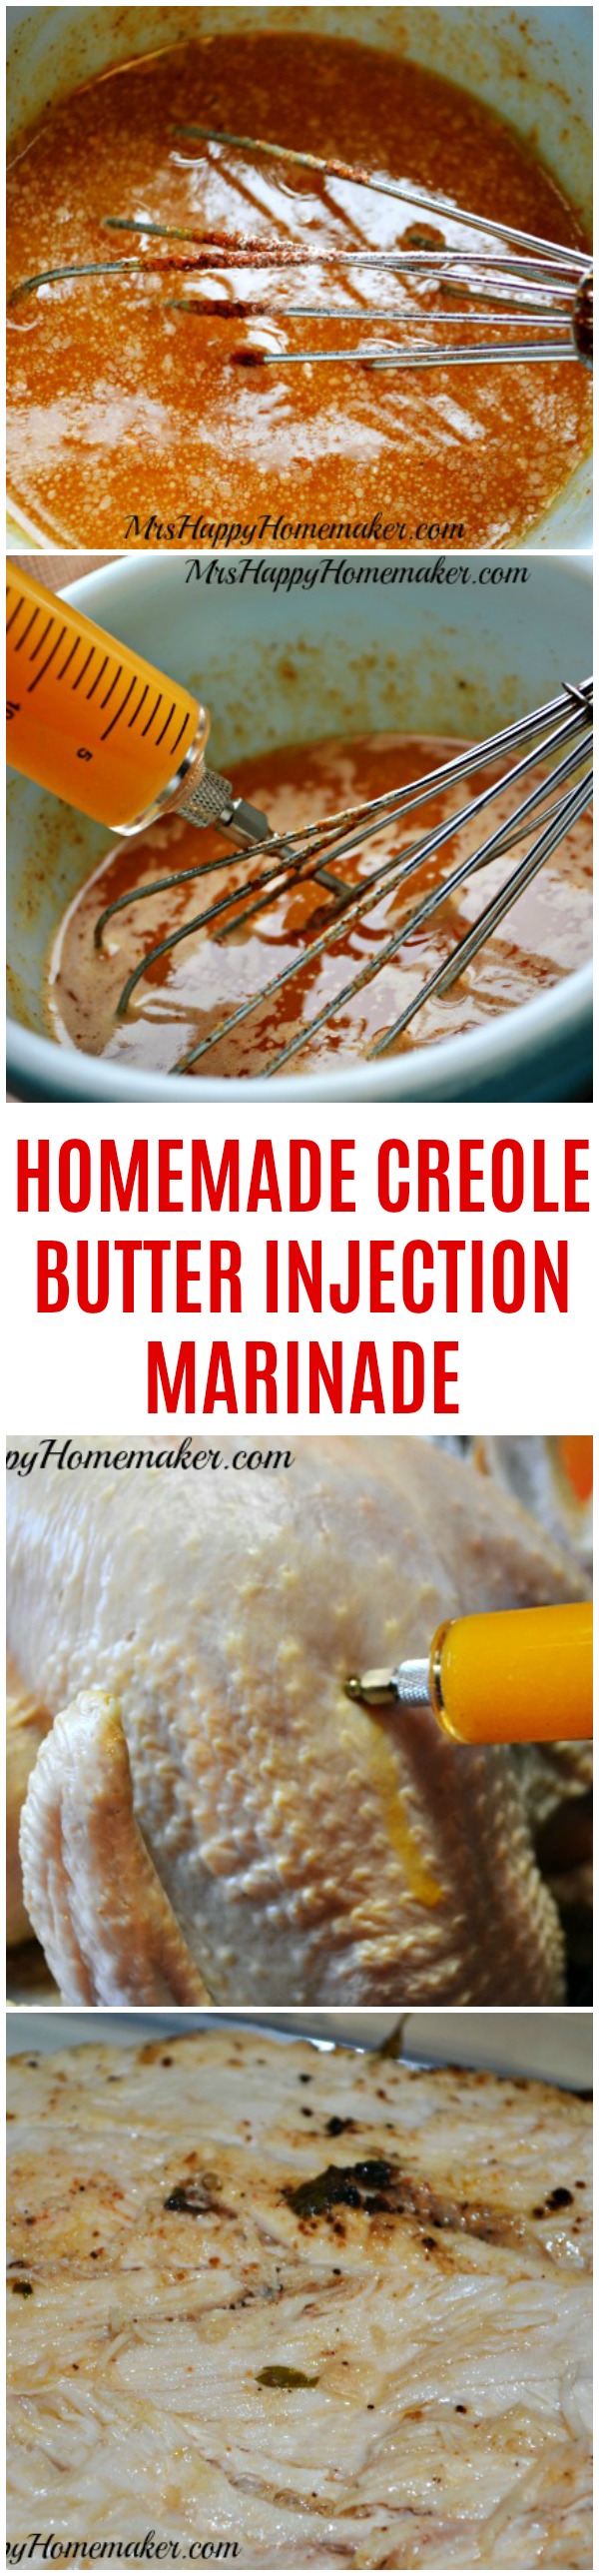 Homemade Creole Butter Injection Marinade 